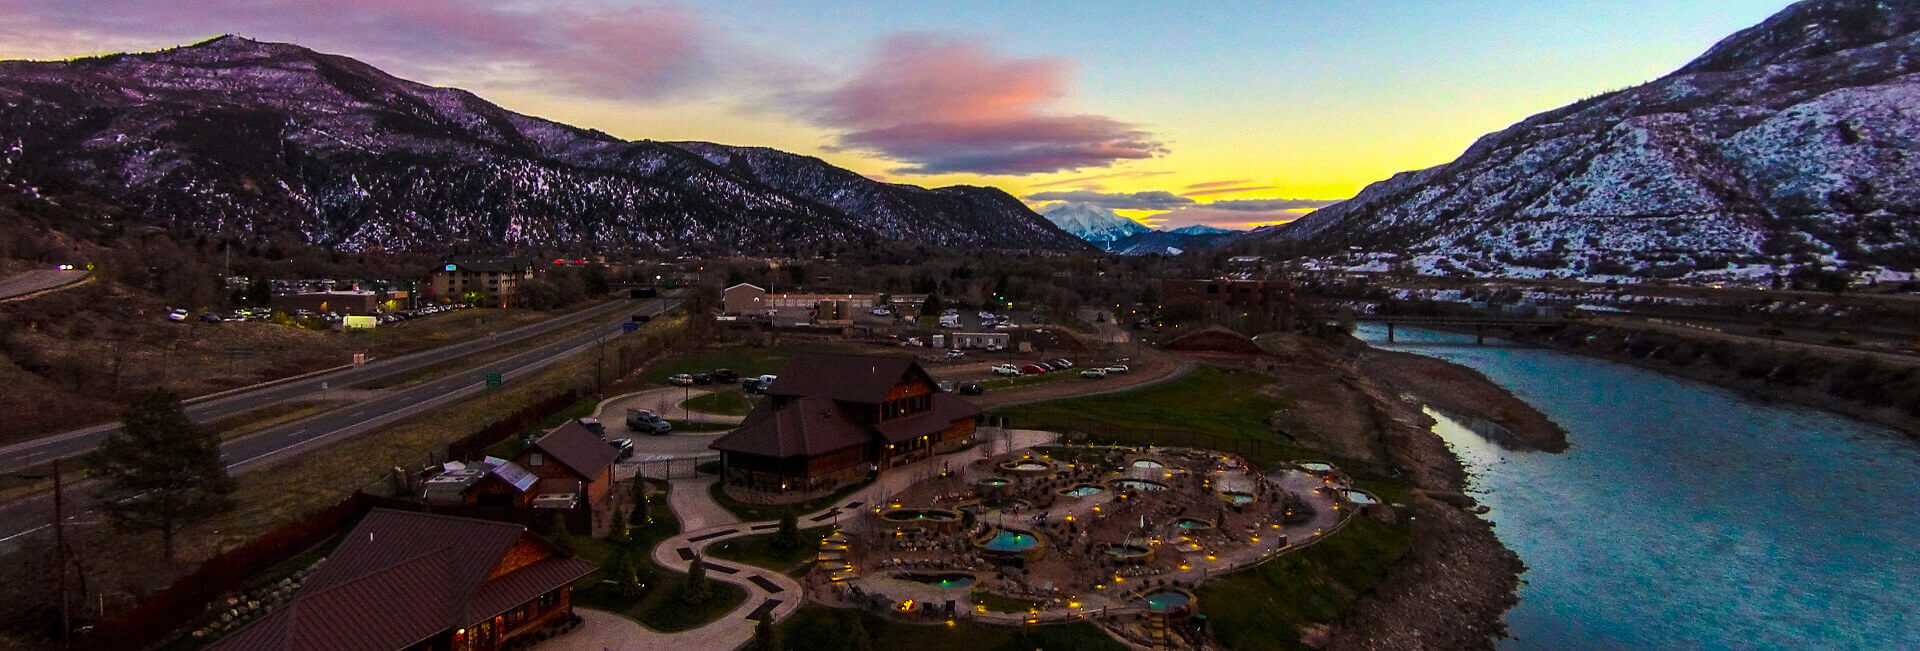 Aerial view of Iron Mountain Hot Springs at sunset